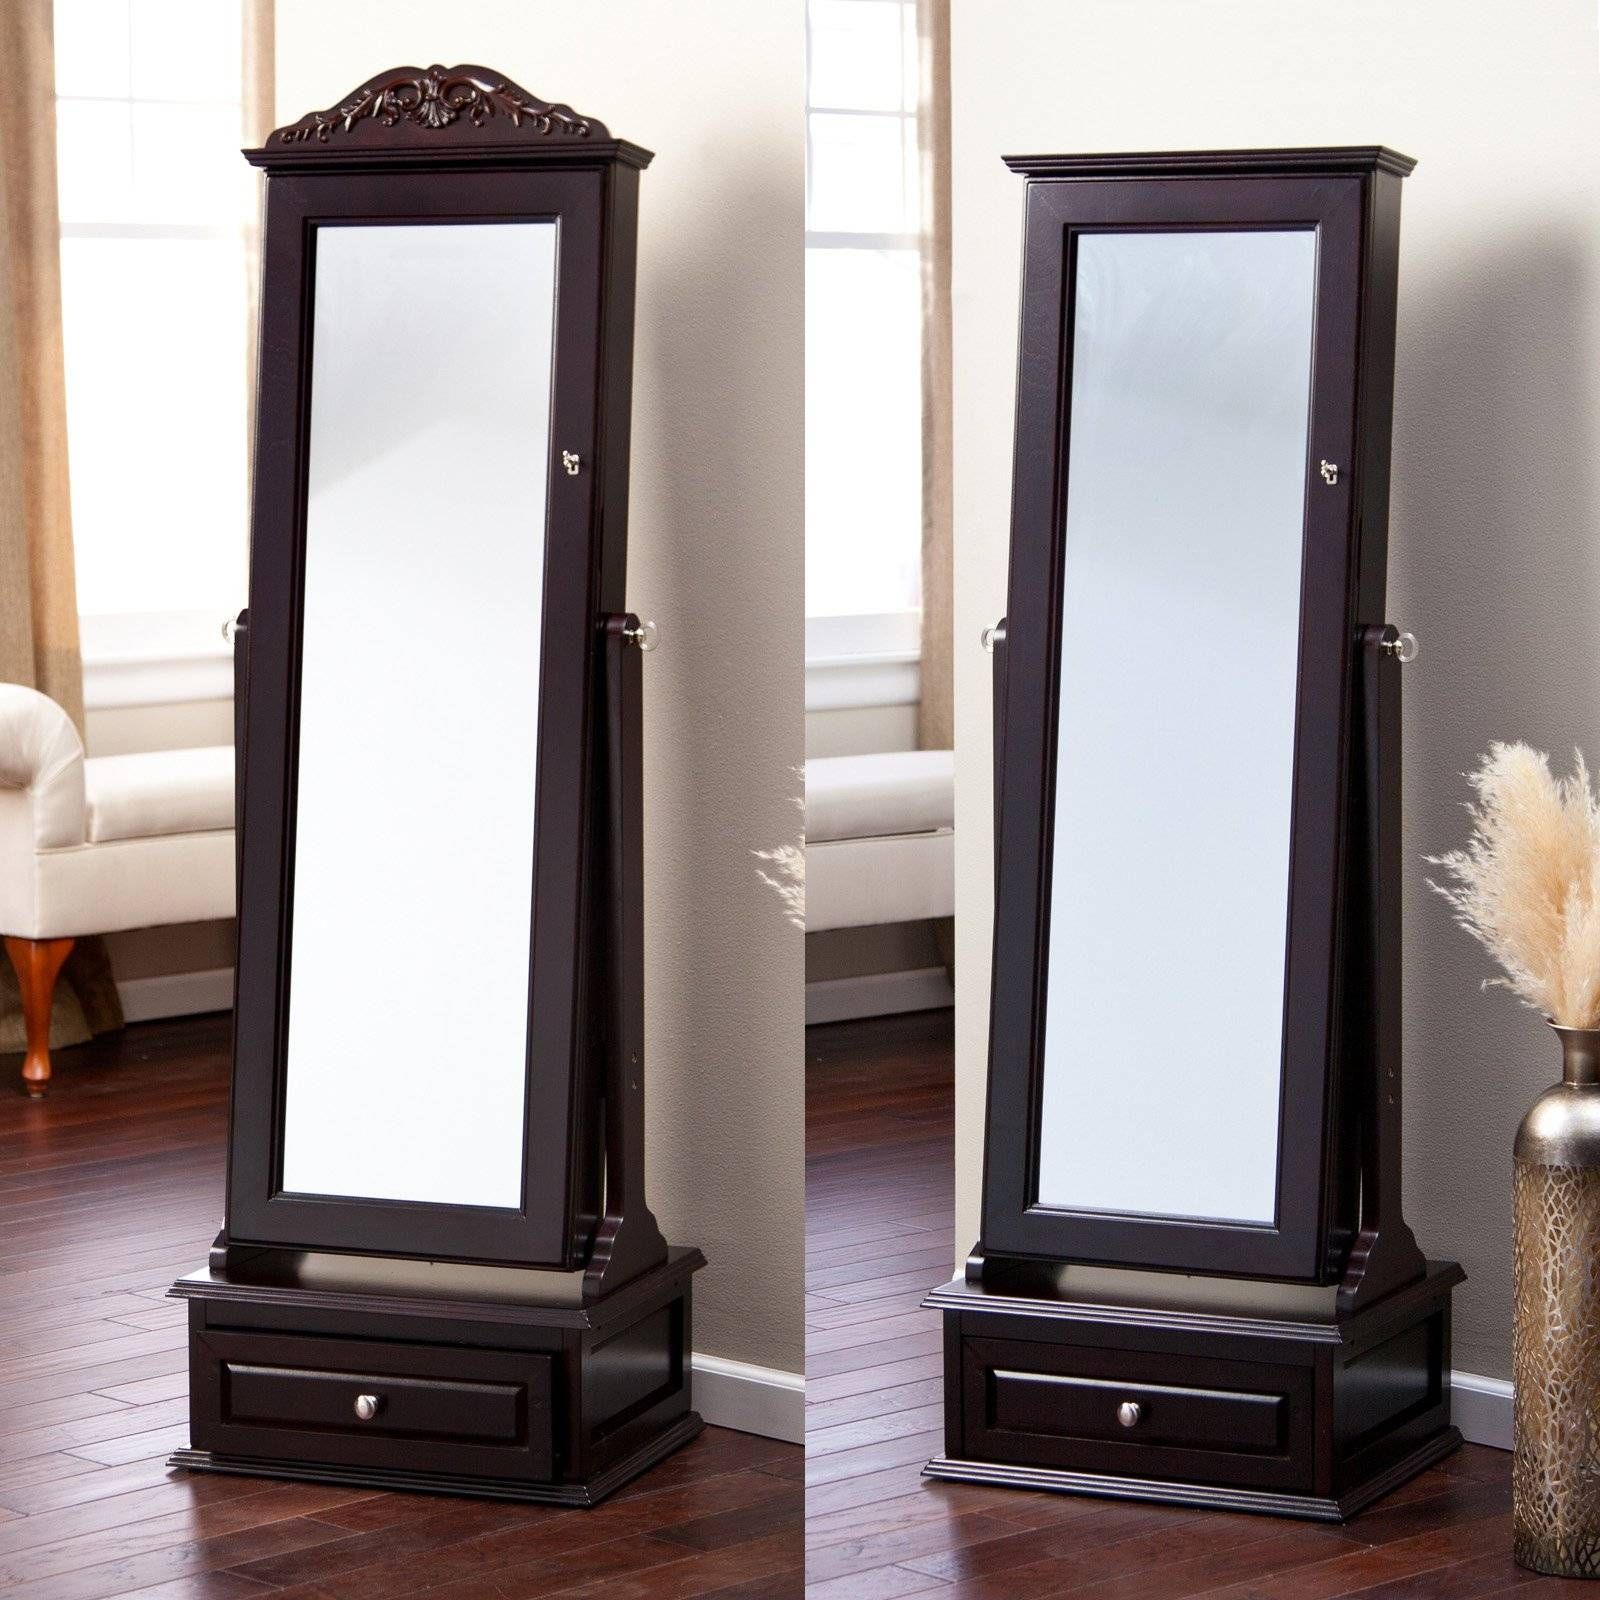 Full length free standing mirror with drawer